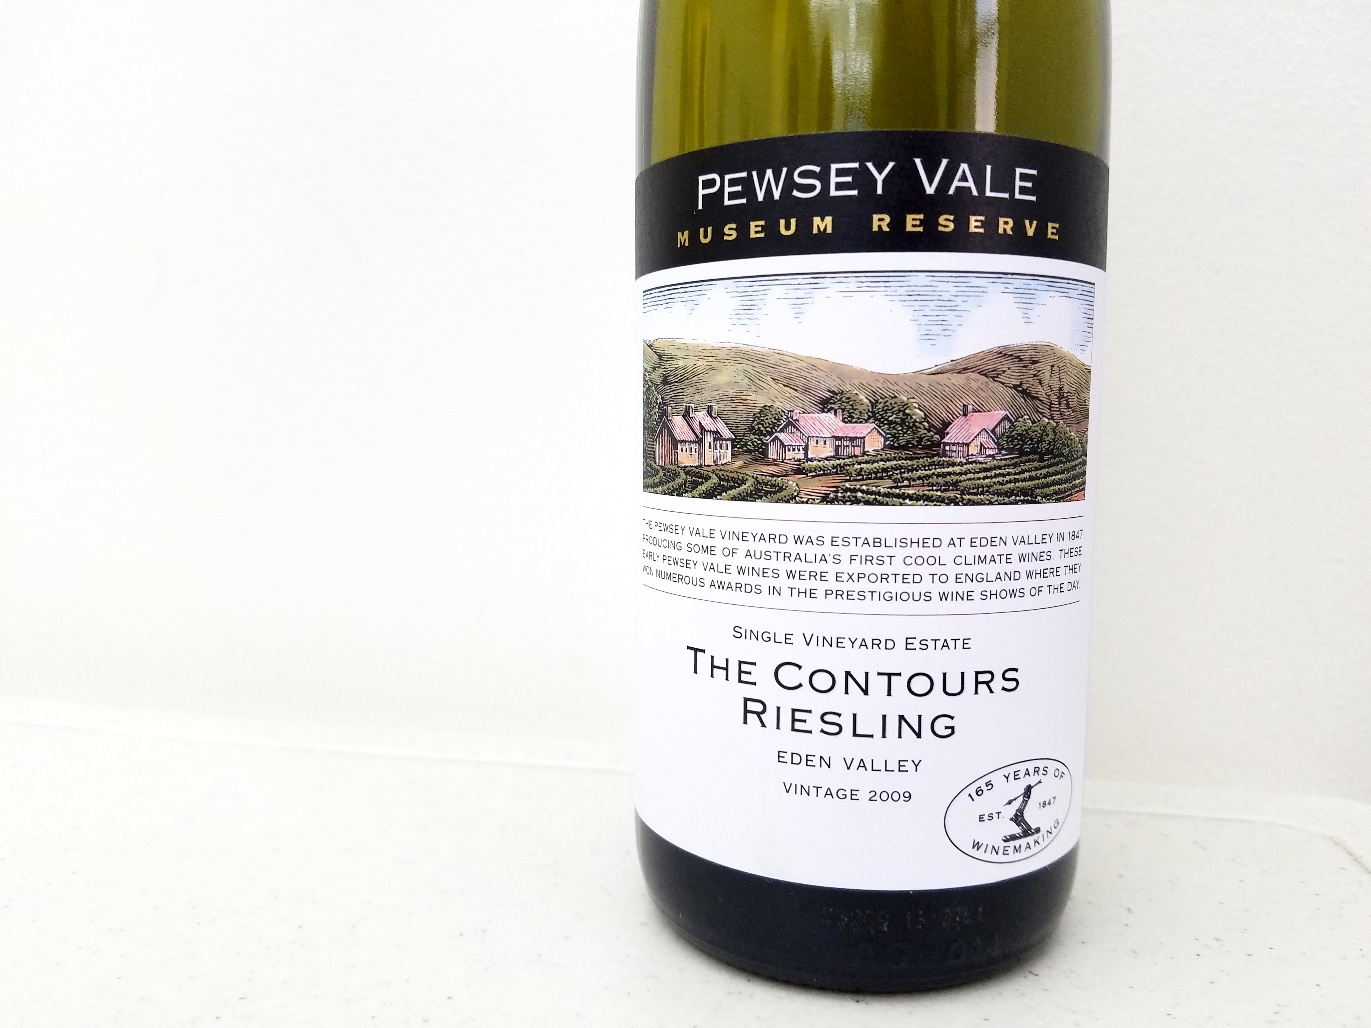 Pewsey Vale Museum Reserve, Single Vineyard Estate The Contours Riesling 2009, Eden Valley, Australia, Wine Casual